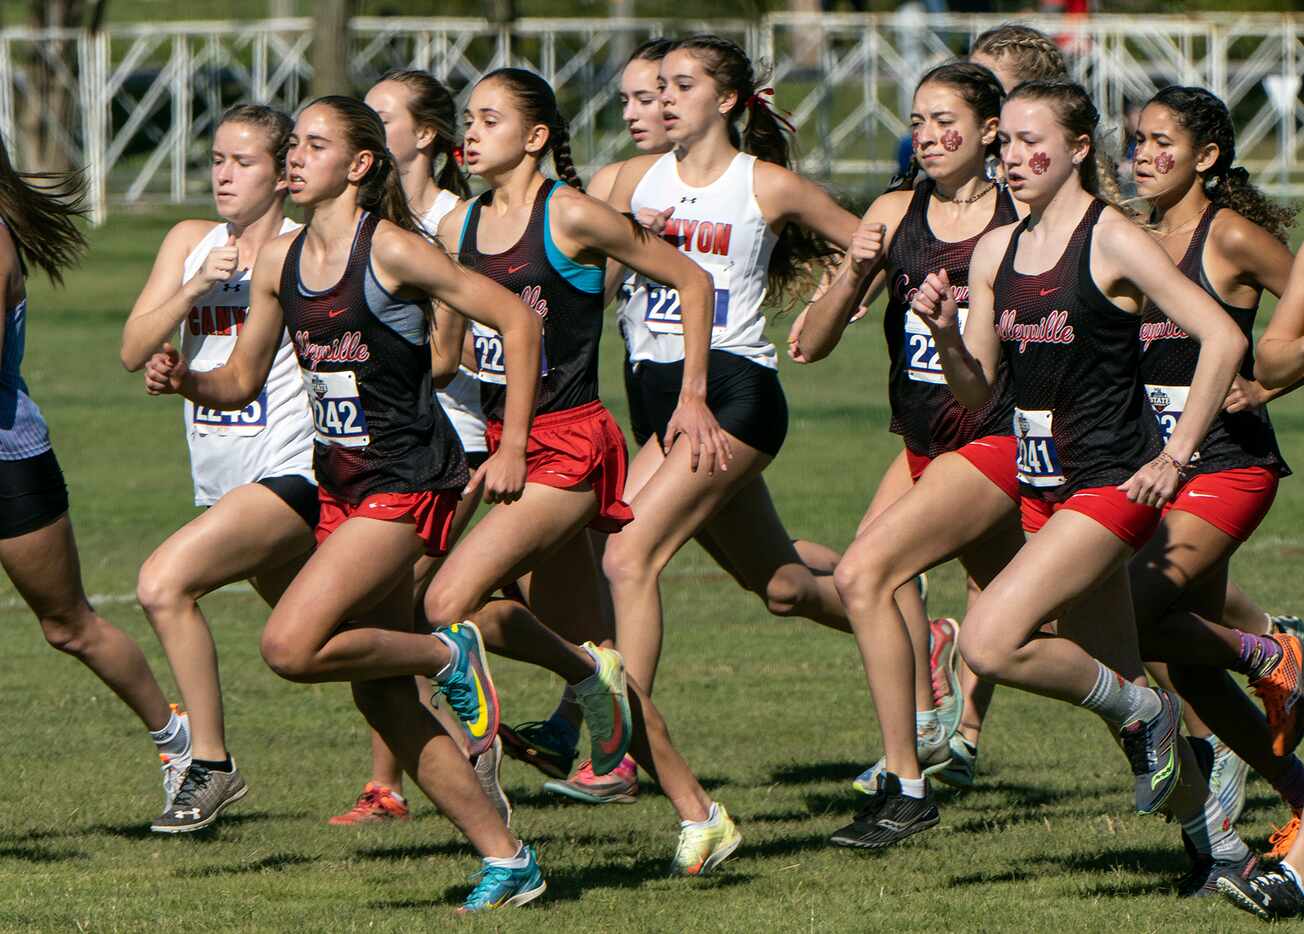 Members of the Colleyville team led by Allie Love, (2242), leave the starting line with the...